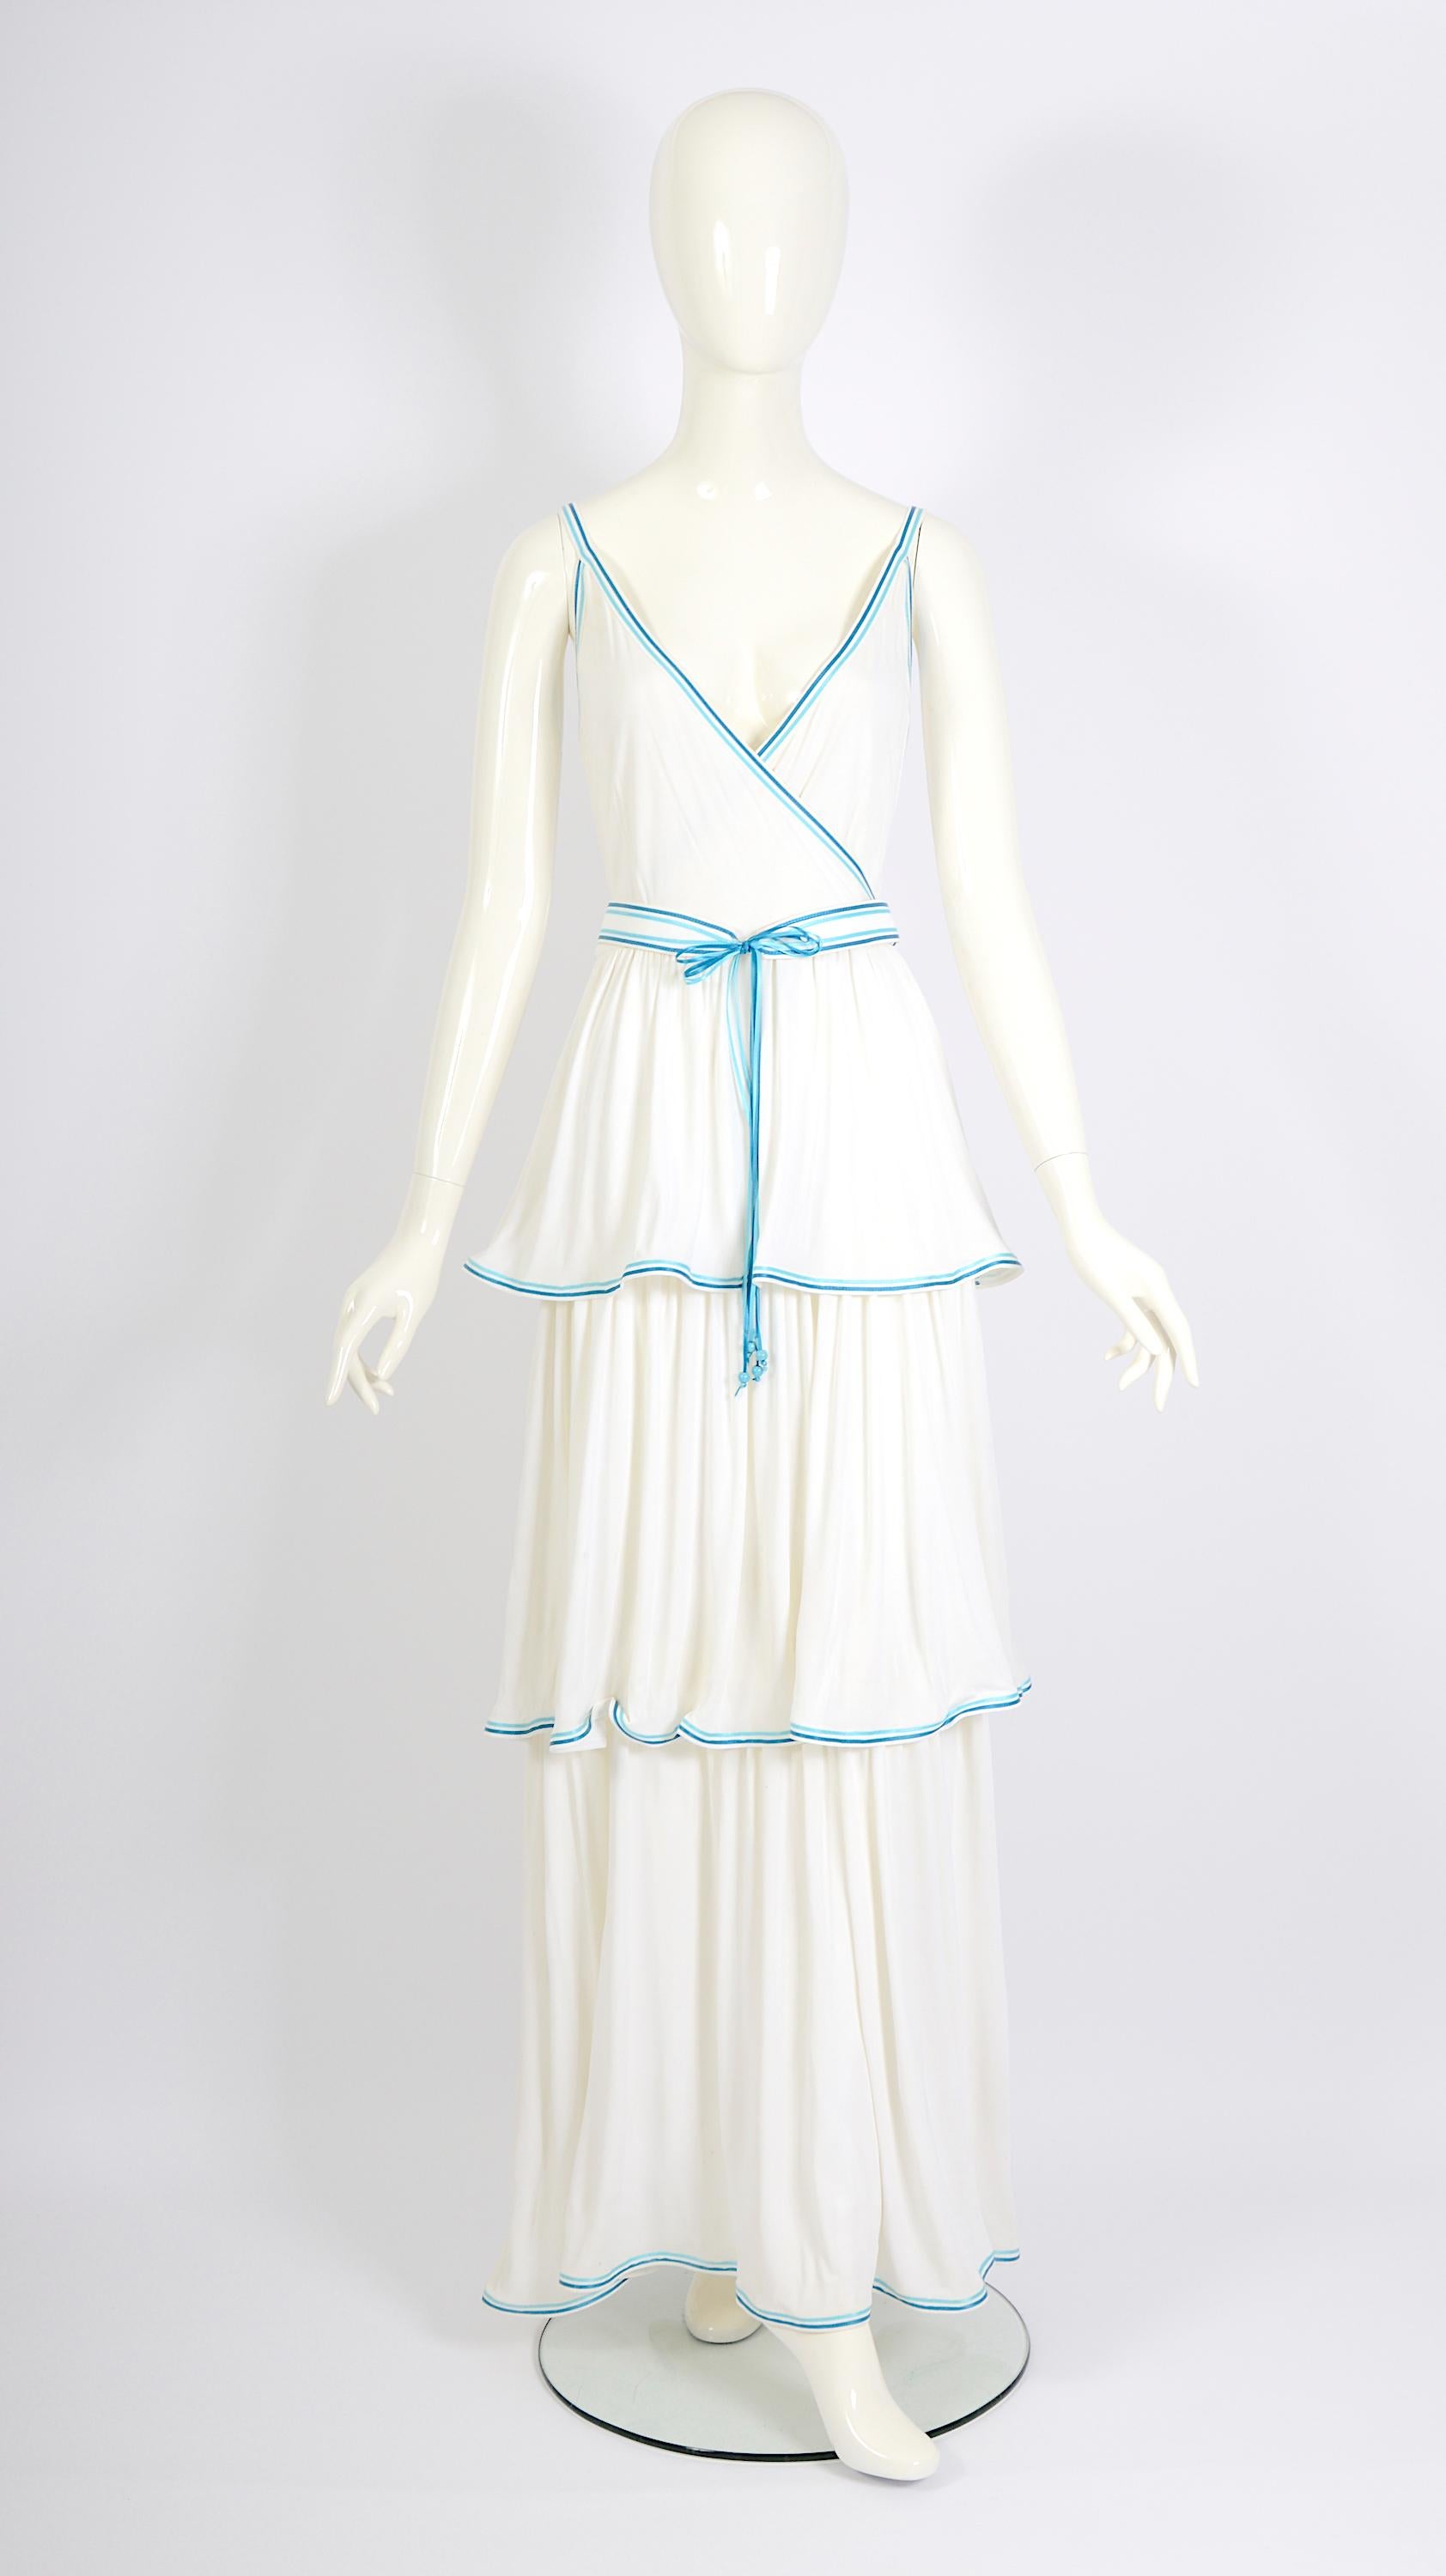 Step into sophistication with this beautiful Louis Féraud vintage 1970s dress, still with tags attached. It's a long, flowing white/cream dress made from soft viscose jersey fabric. The skirt has layers with pretty blue ribbon trim, and the with